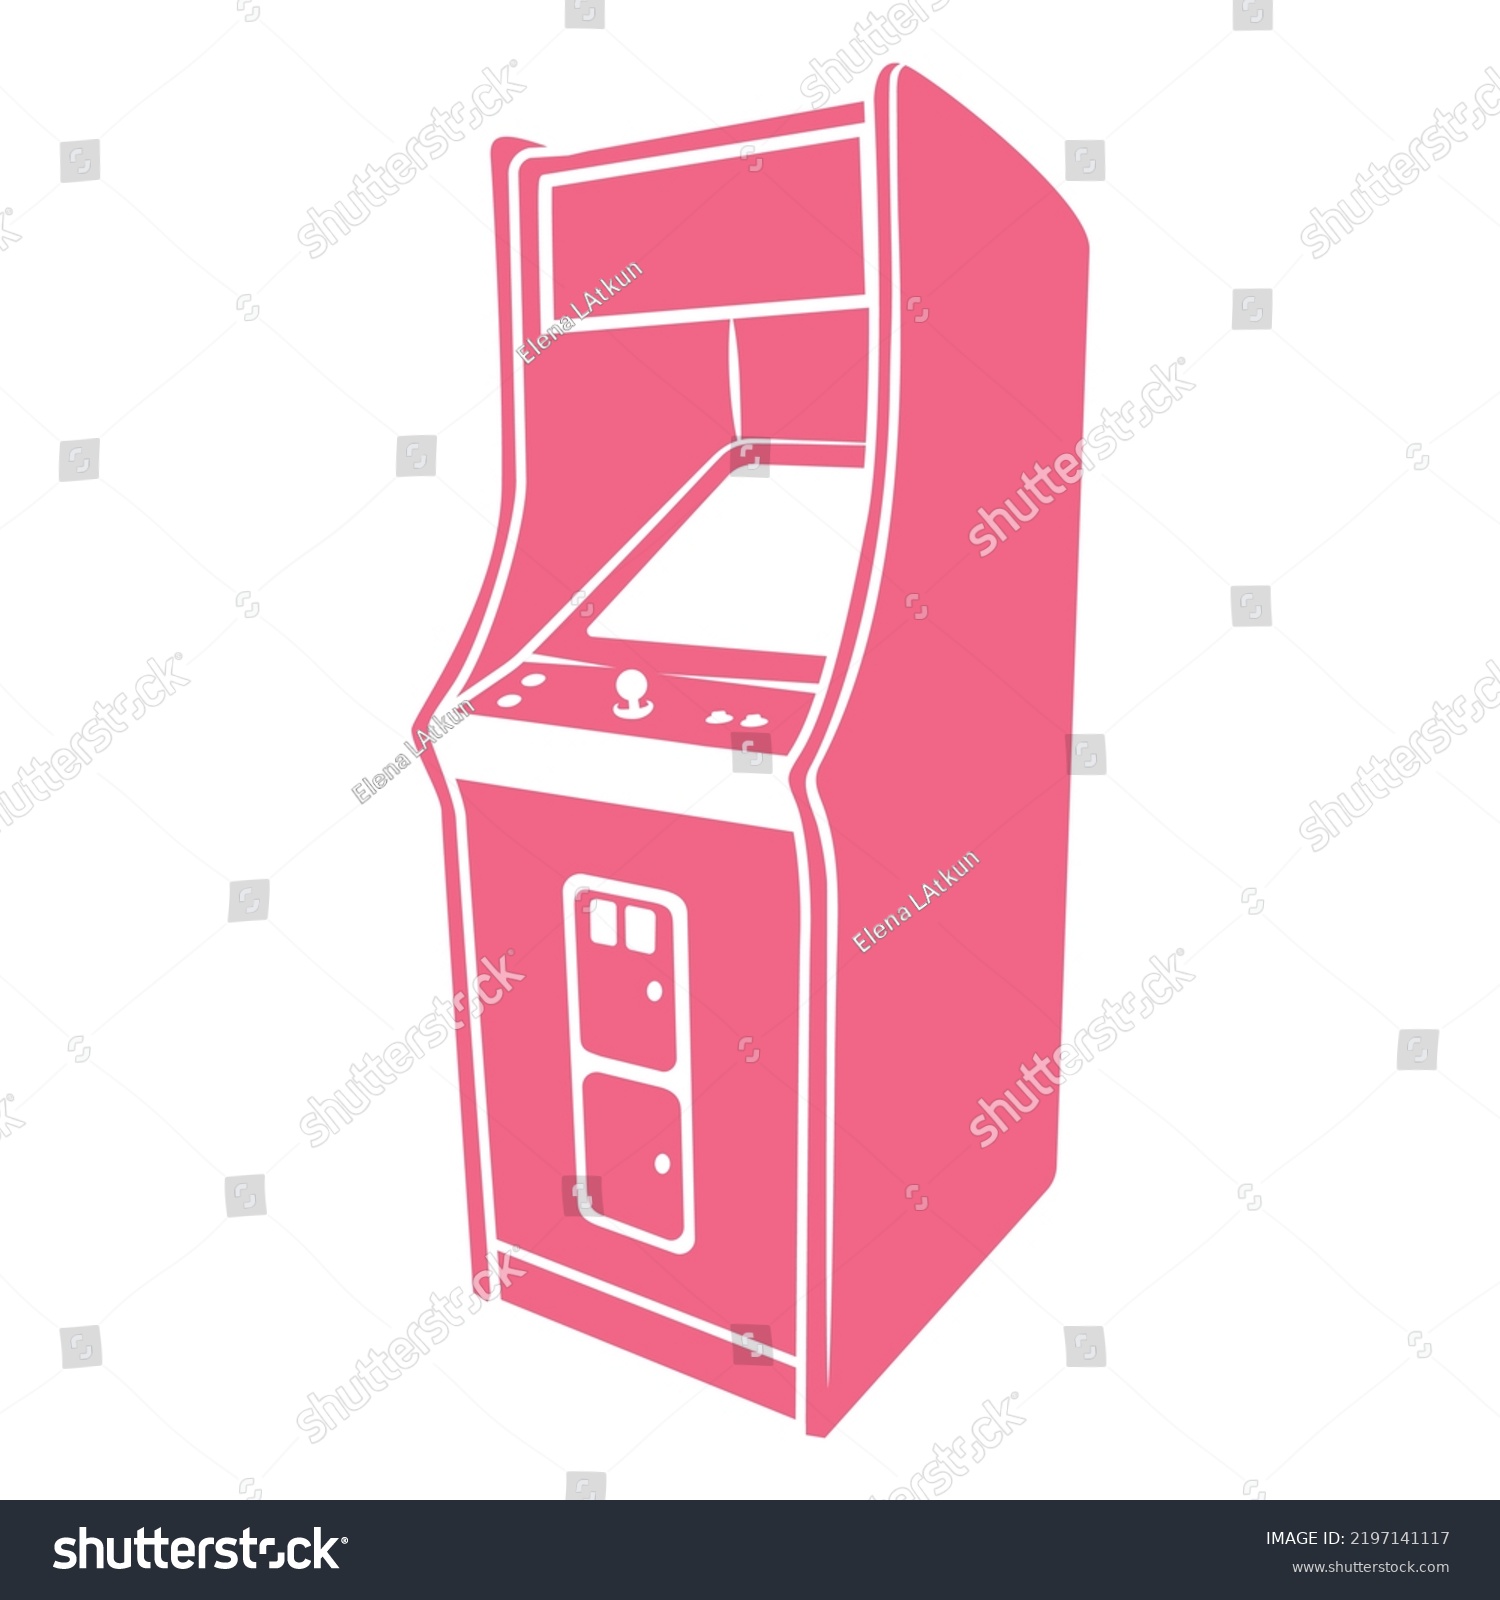 SVG of Vintage Gaming Arcade Cut Out. High quality vector svg